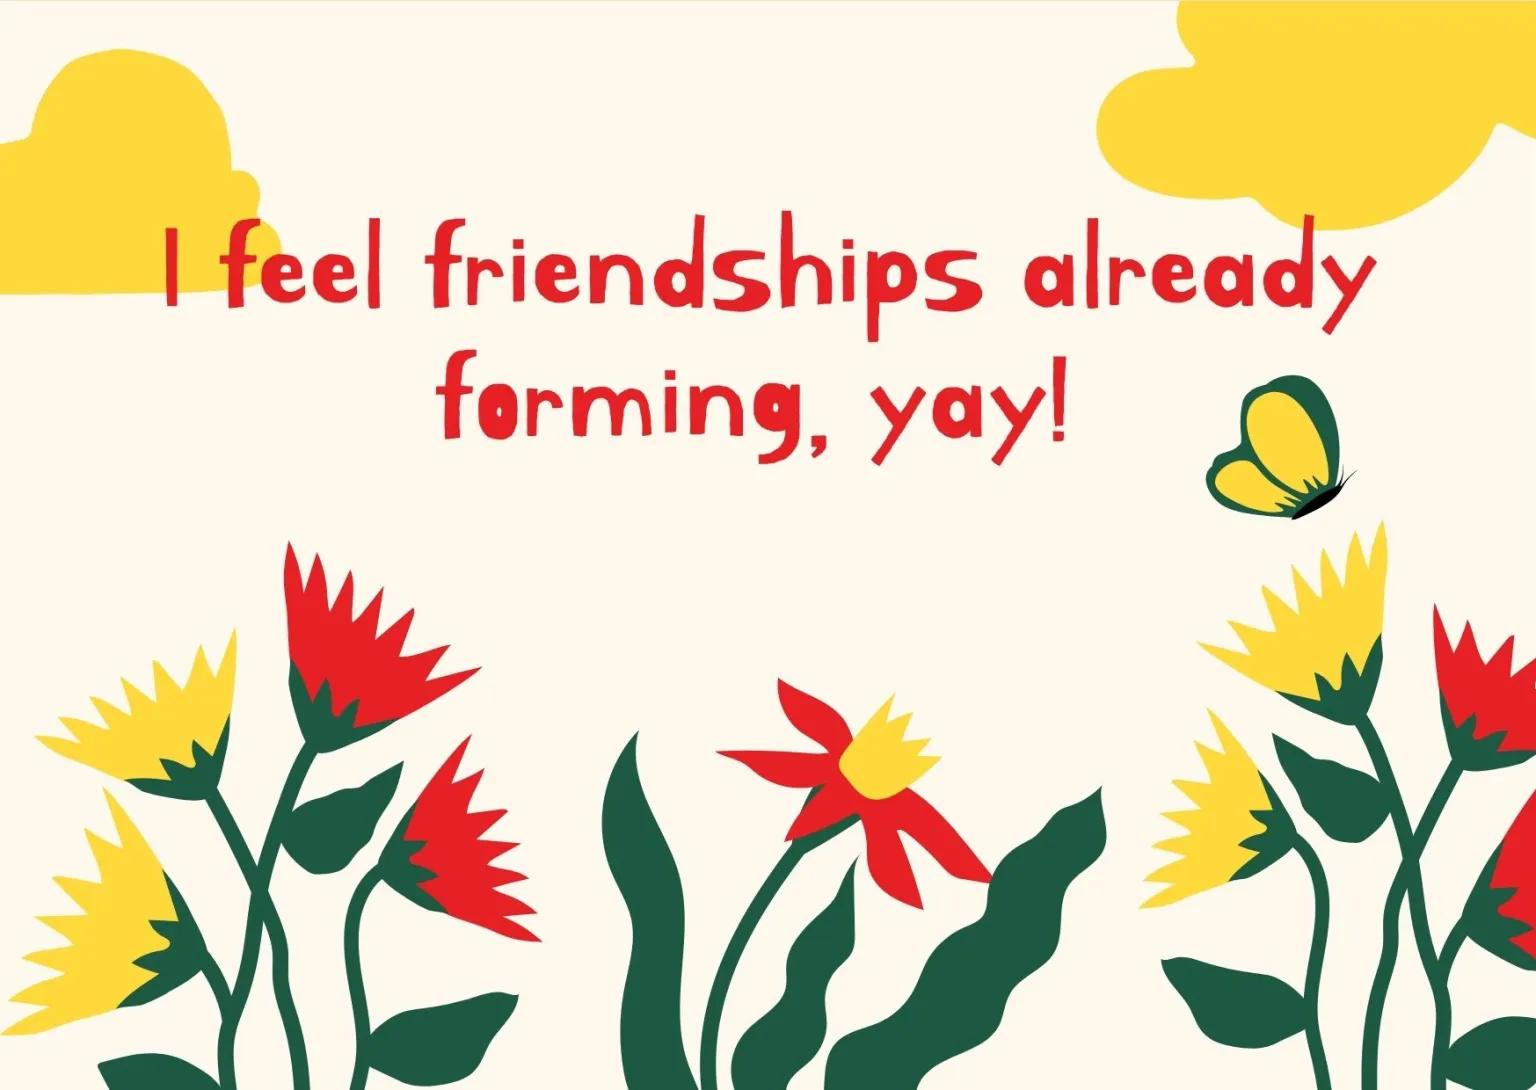 Text "I feel friendships already forming, yay! on wallpaper with flowers